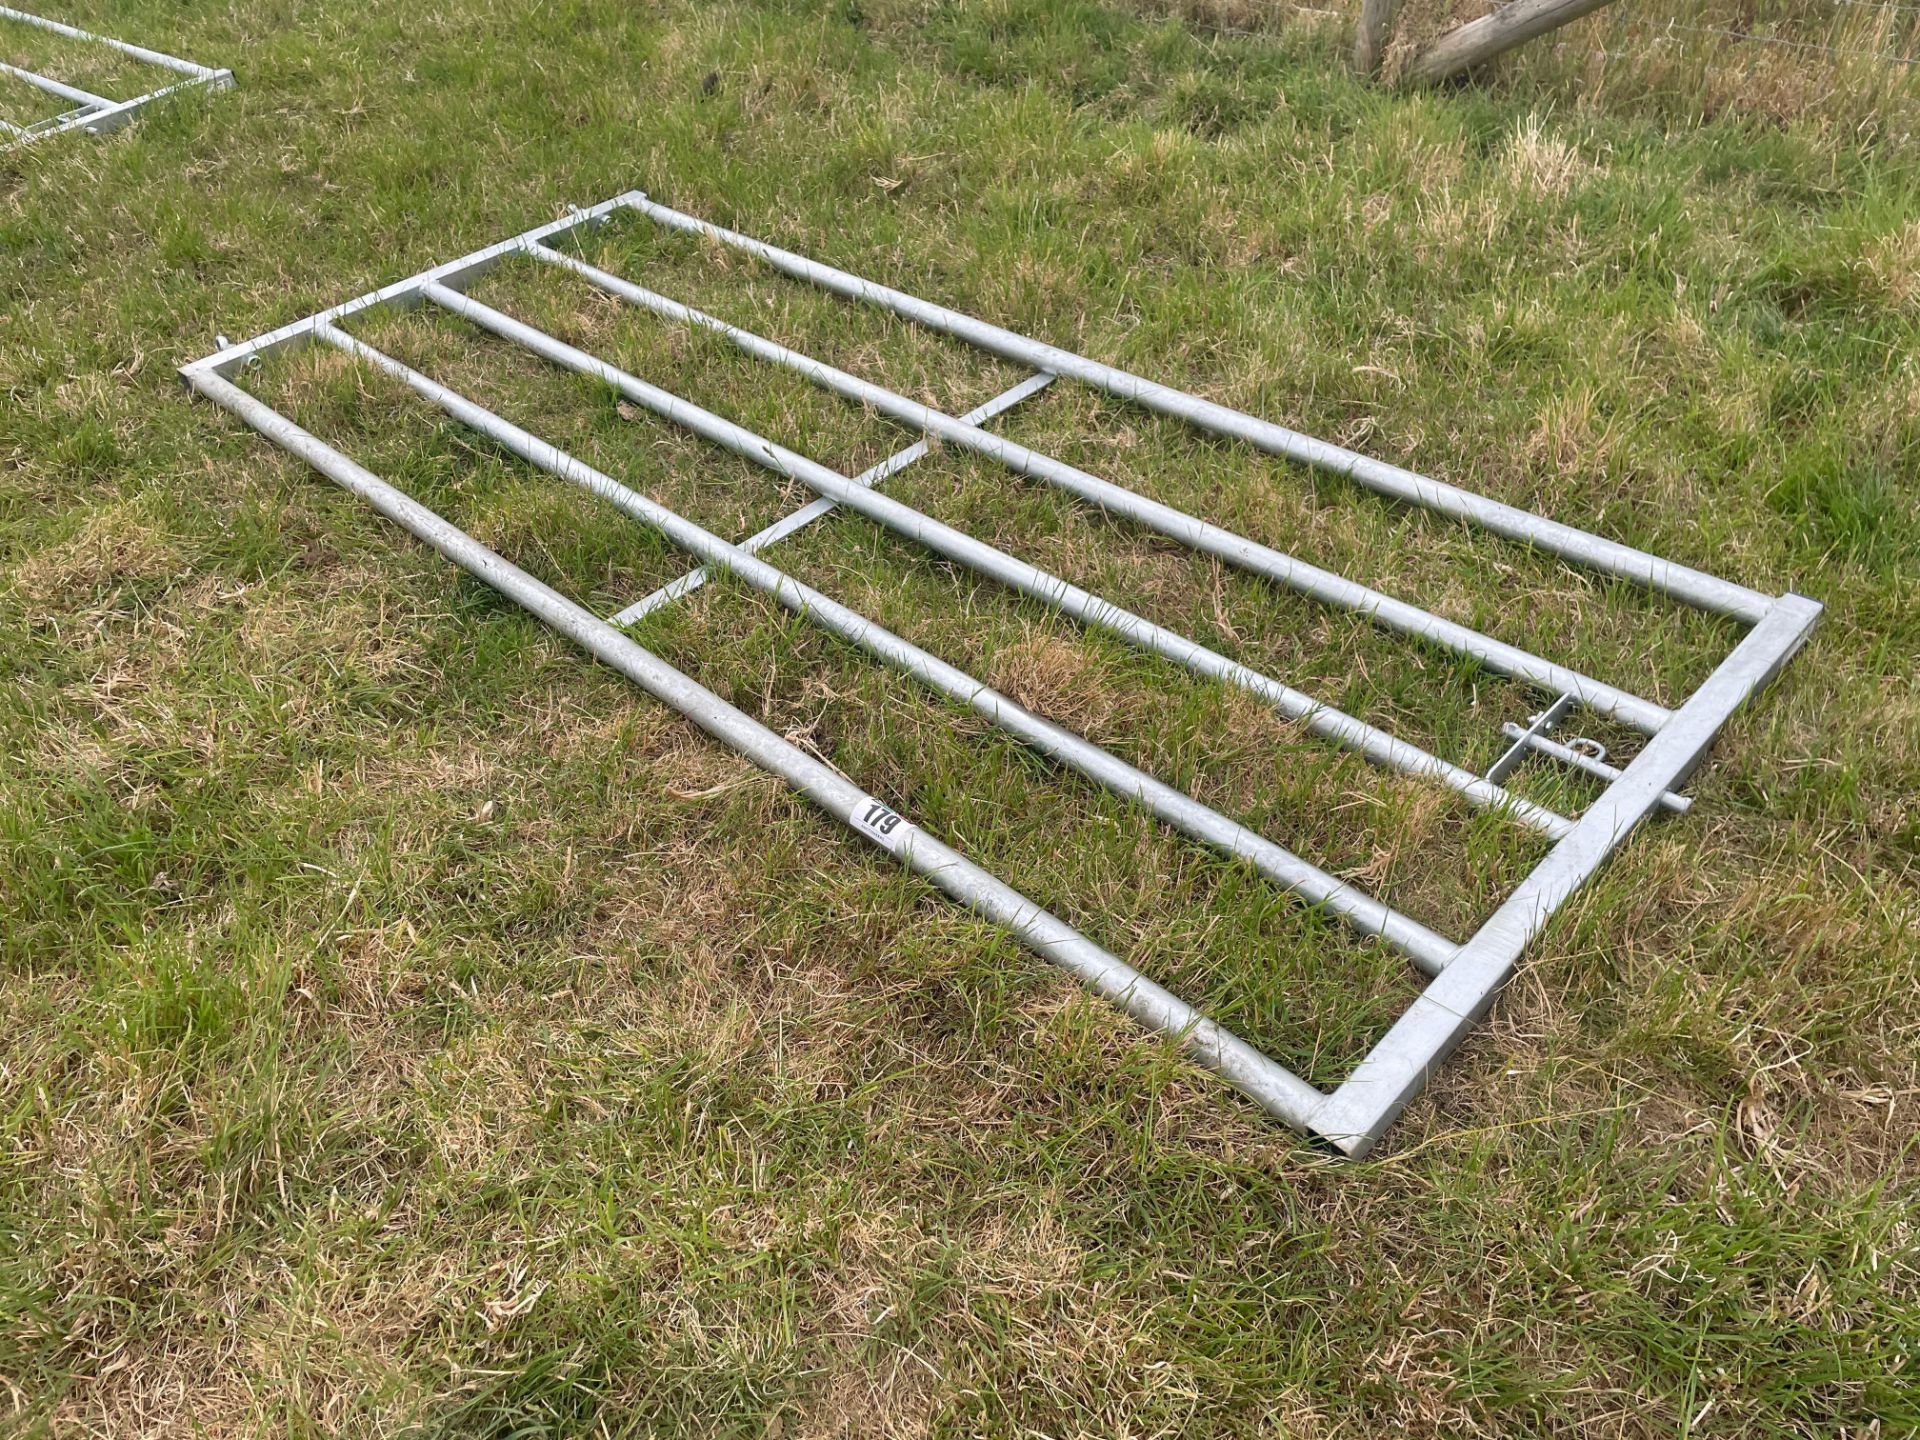 9ft Cattle gate (as new)